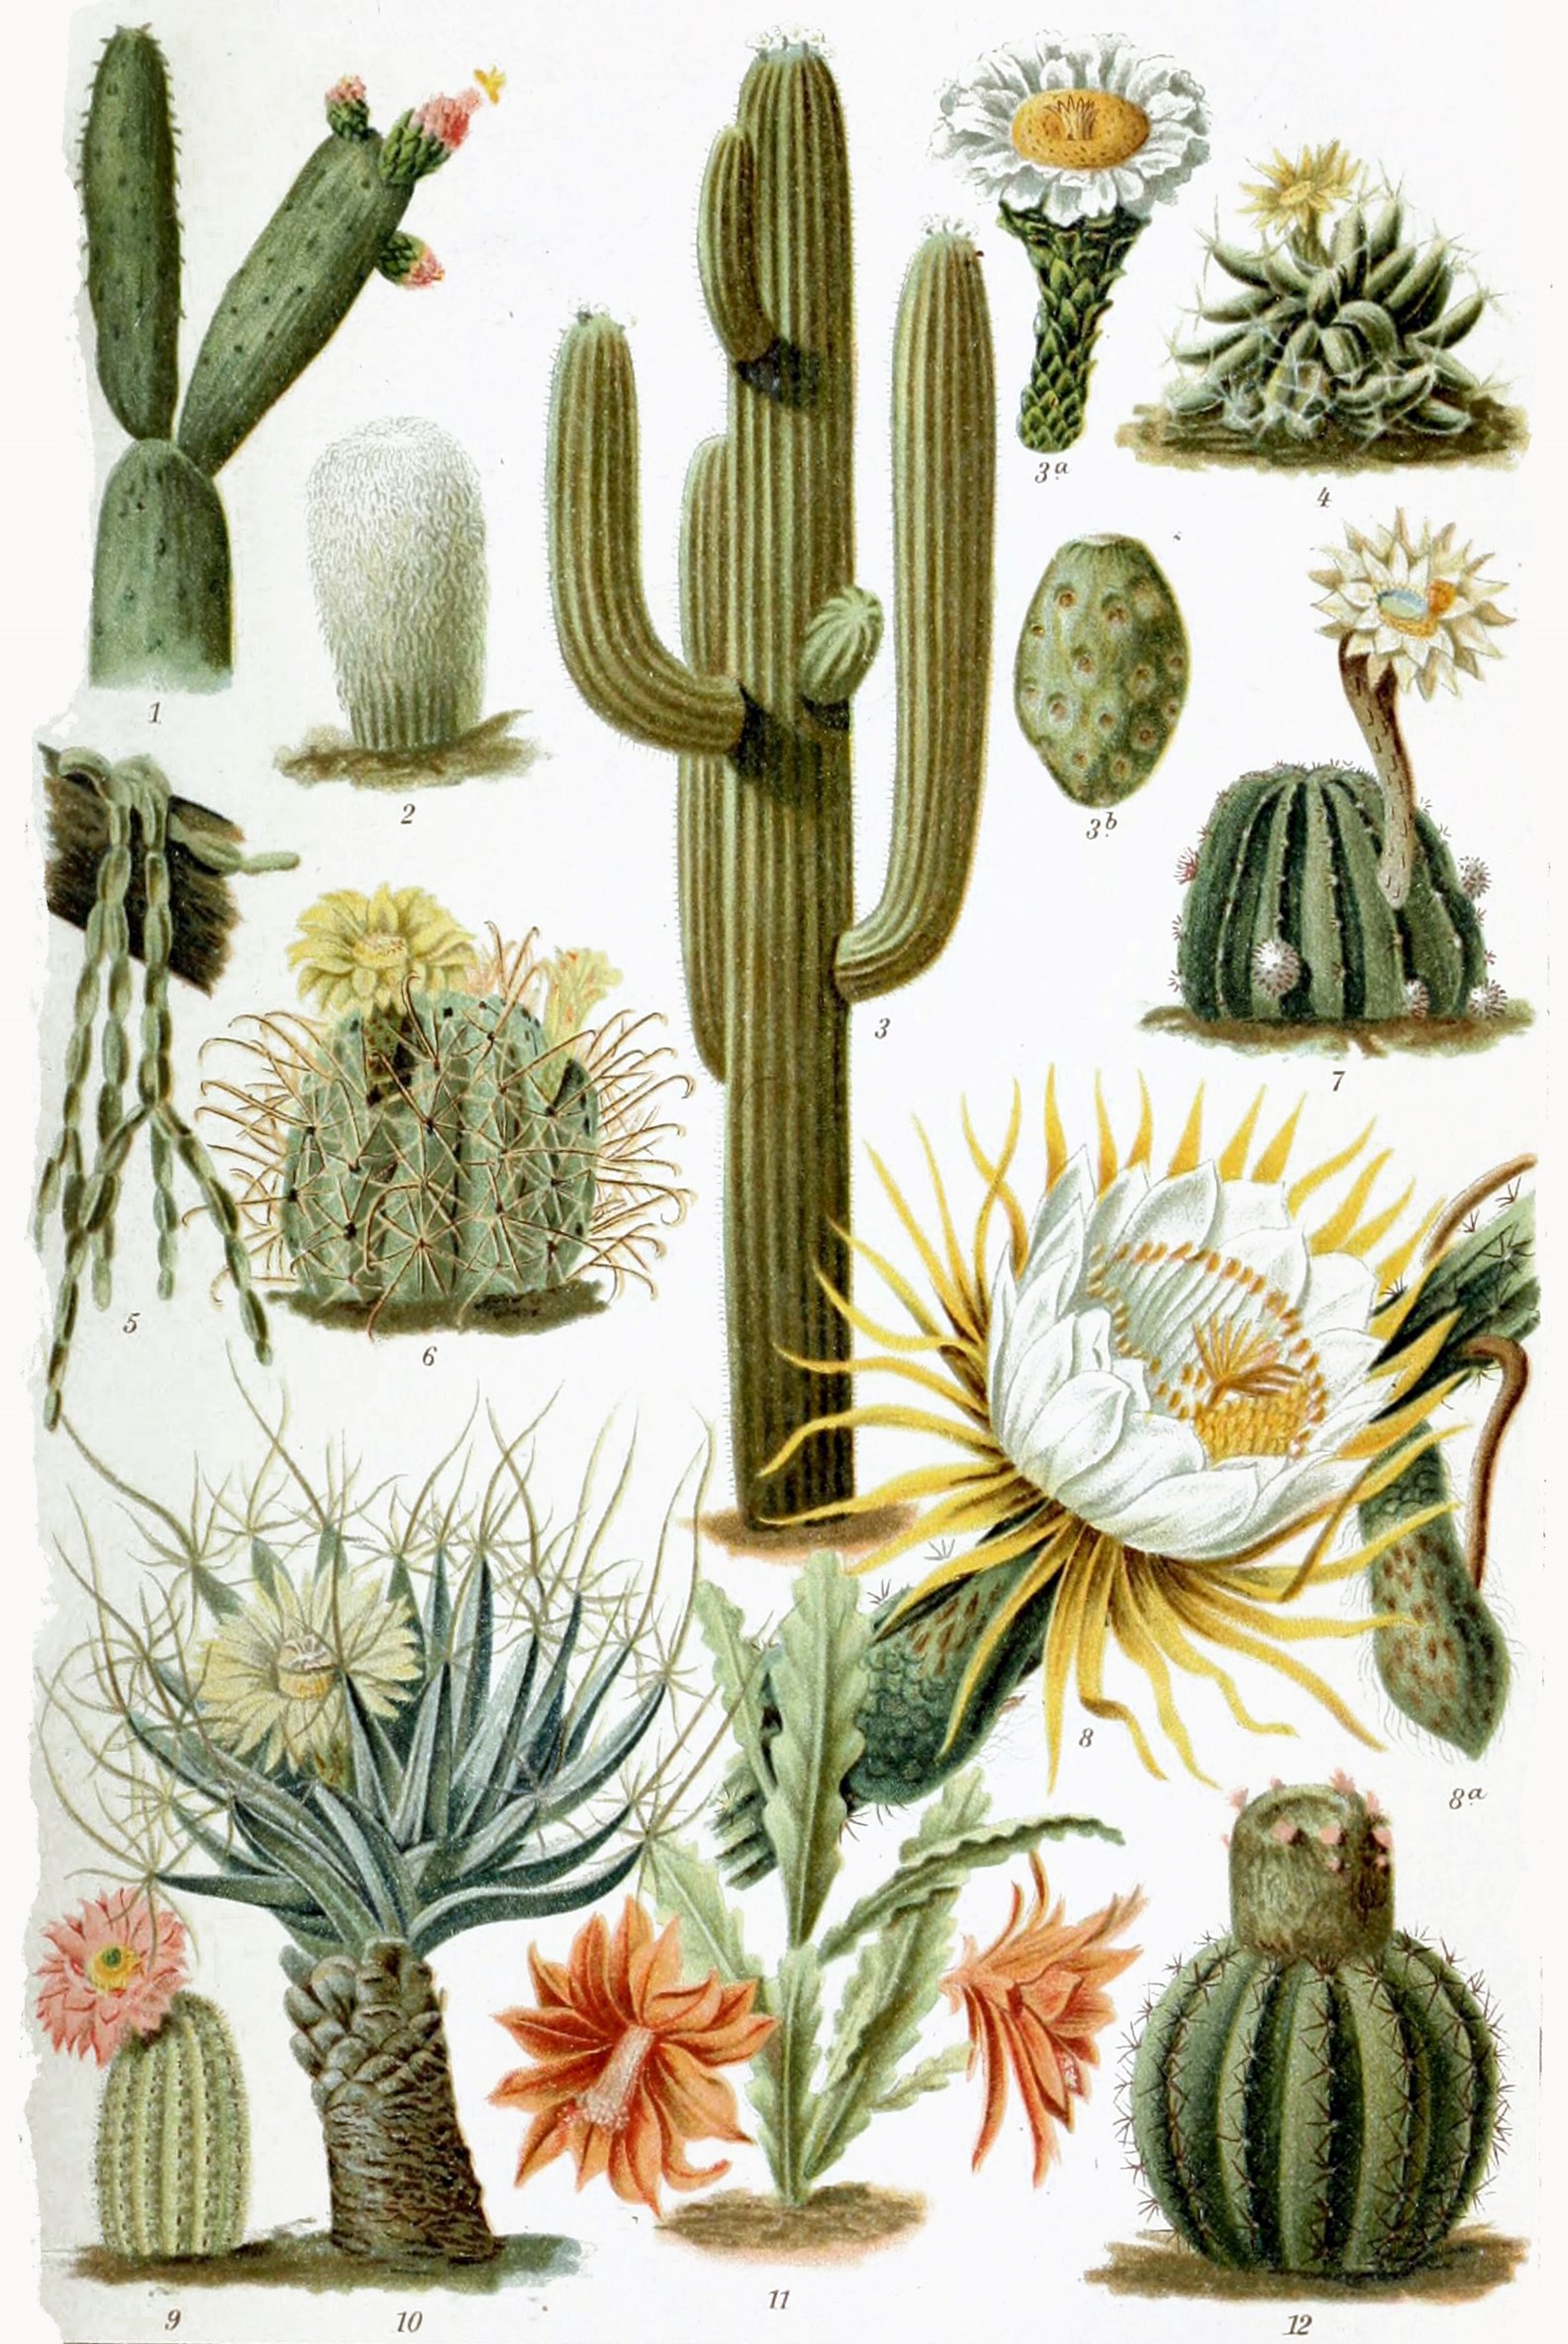 Illustrations of various members of the Cactaceae family